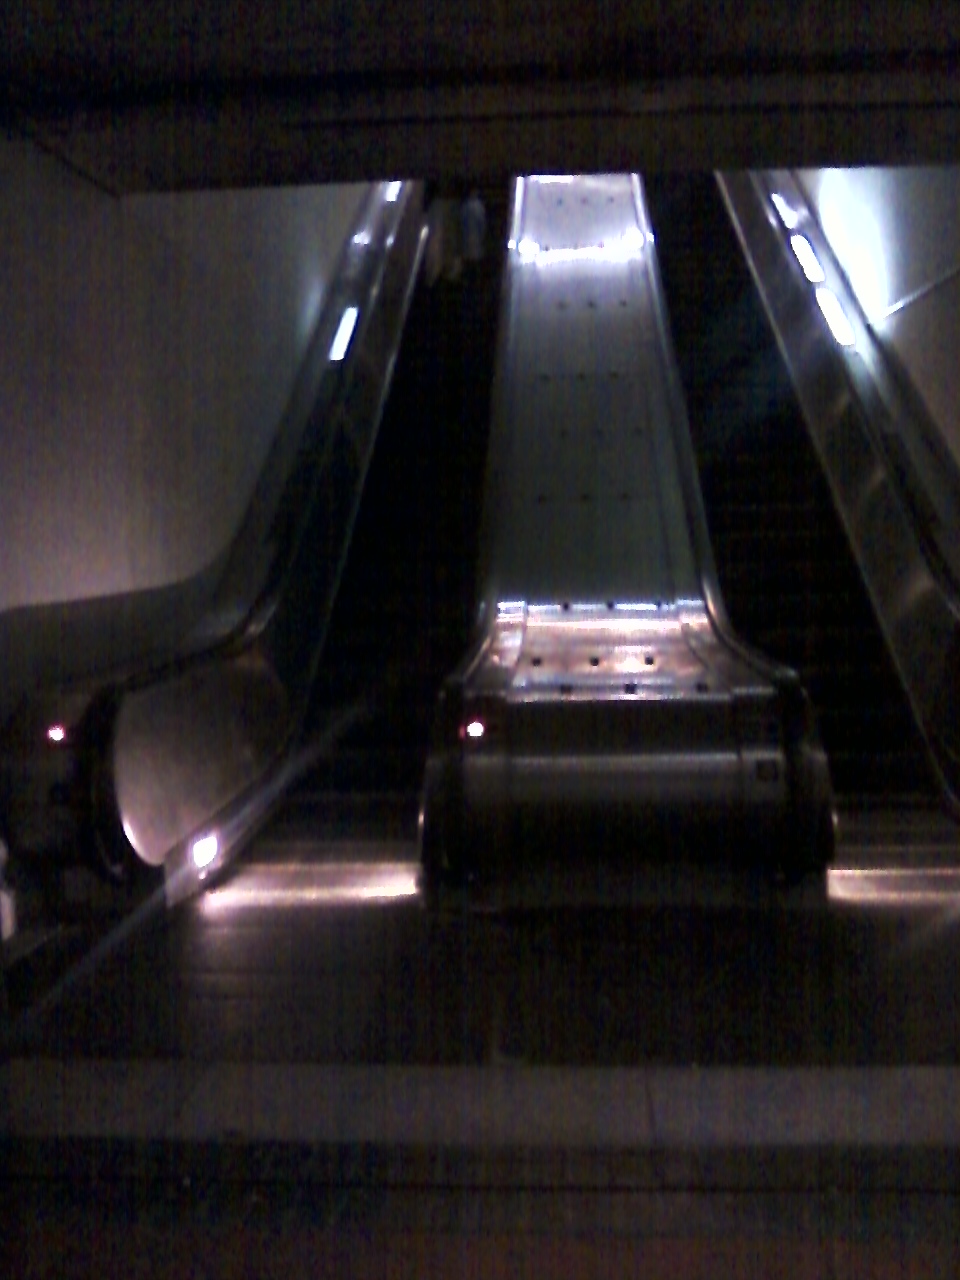 04/14/2011- Out of
service escalator at WMATA/DC Metro Tenleytown station. Sole functioning
escalator took passengers downward, forcing passengers going upstairs to
walk up 200+ feet of stairs. For further details, please visit
www.wirelessnotes.org.